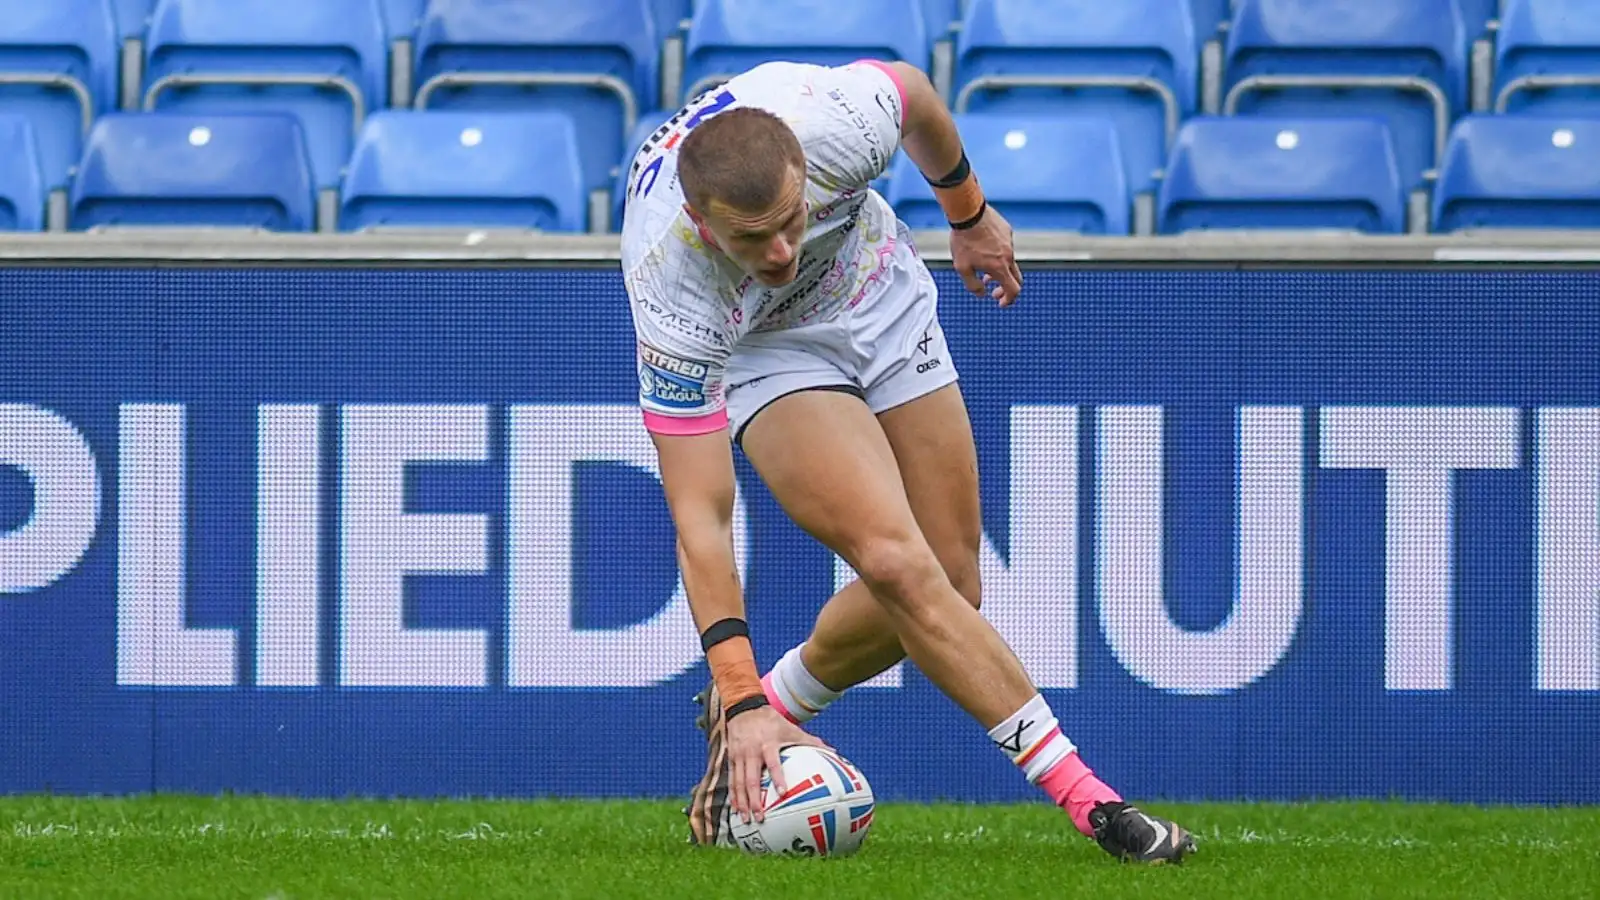 Rohan Smith praises ‘brave’ Leeds Rhinos star after strong display: ‘He carries the ball hard’